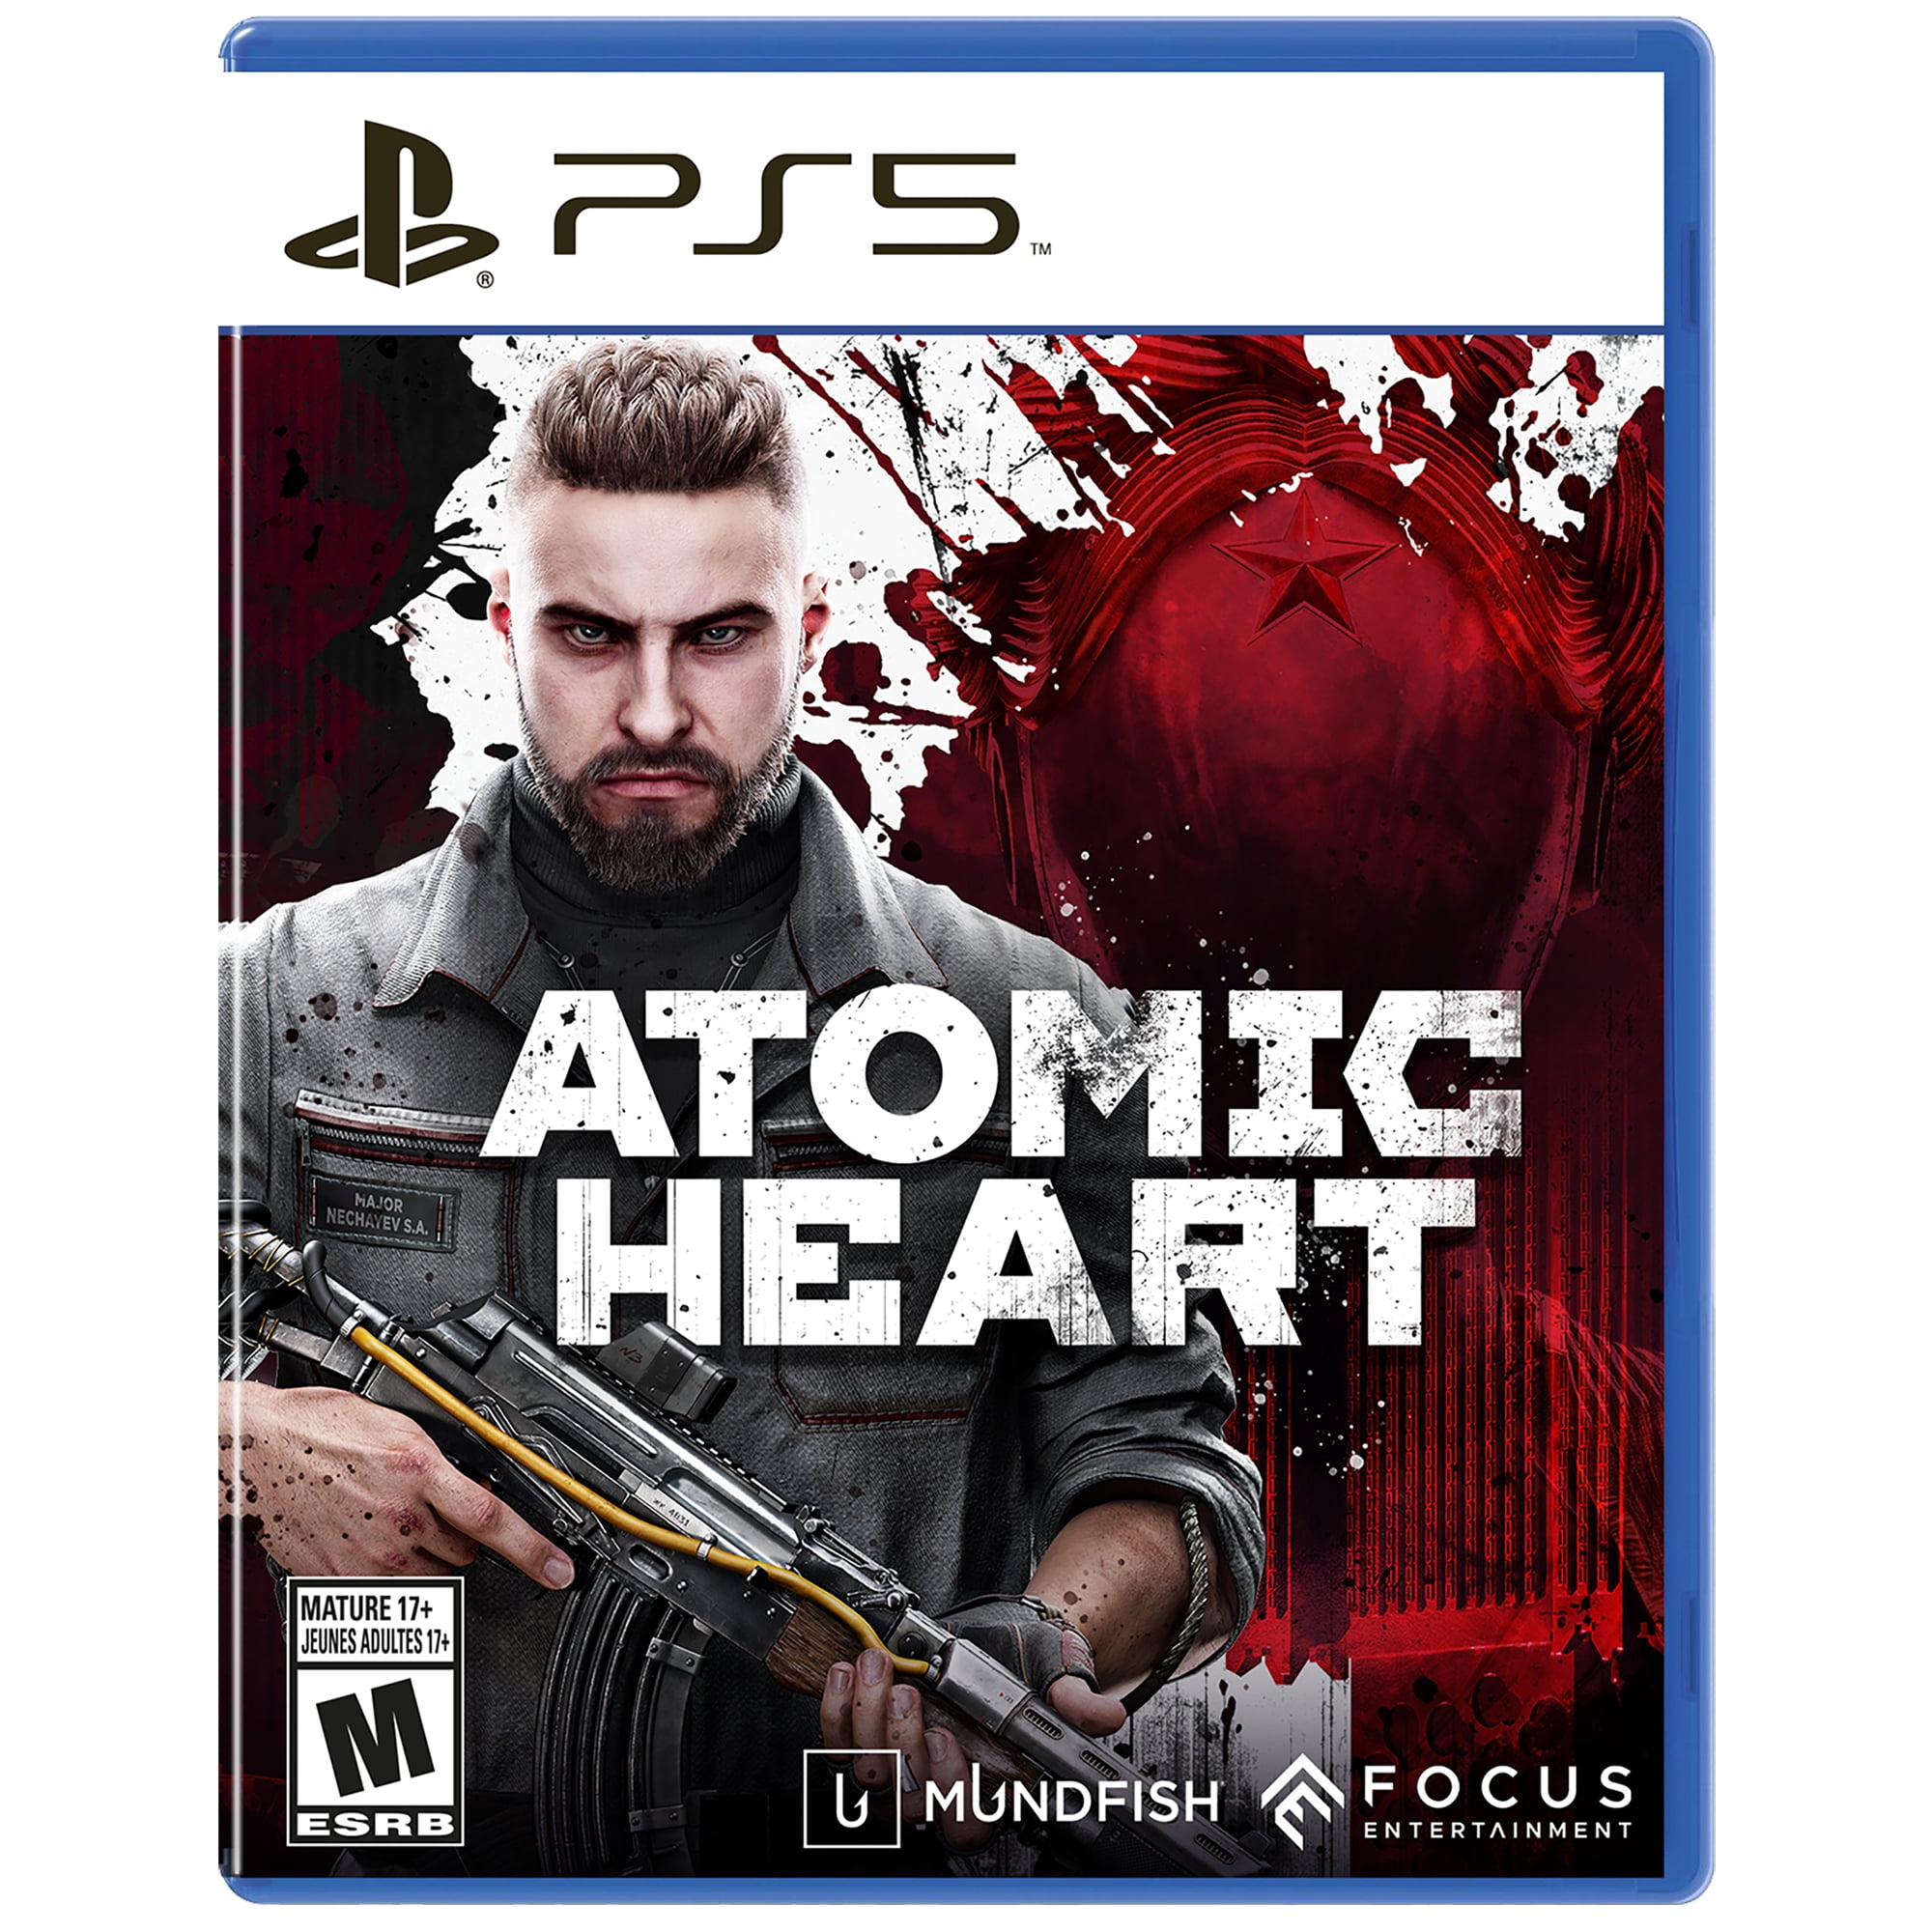 Atomic Heart To Be Published by Focus Home in Early 2023